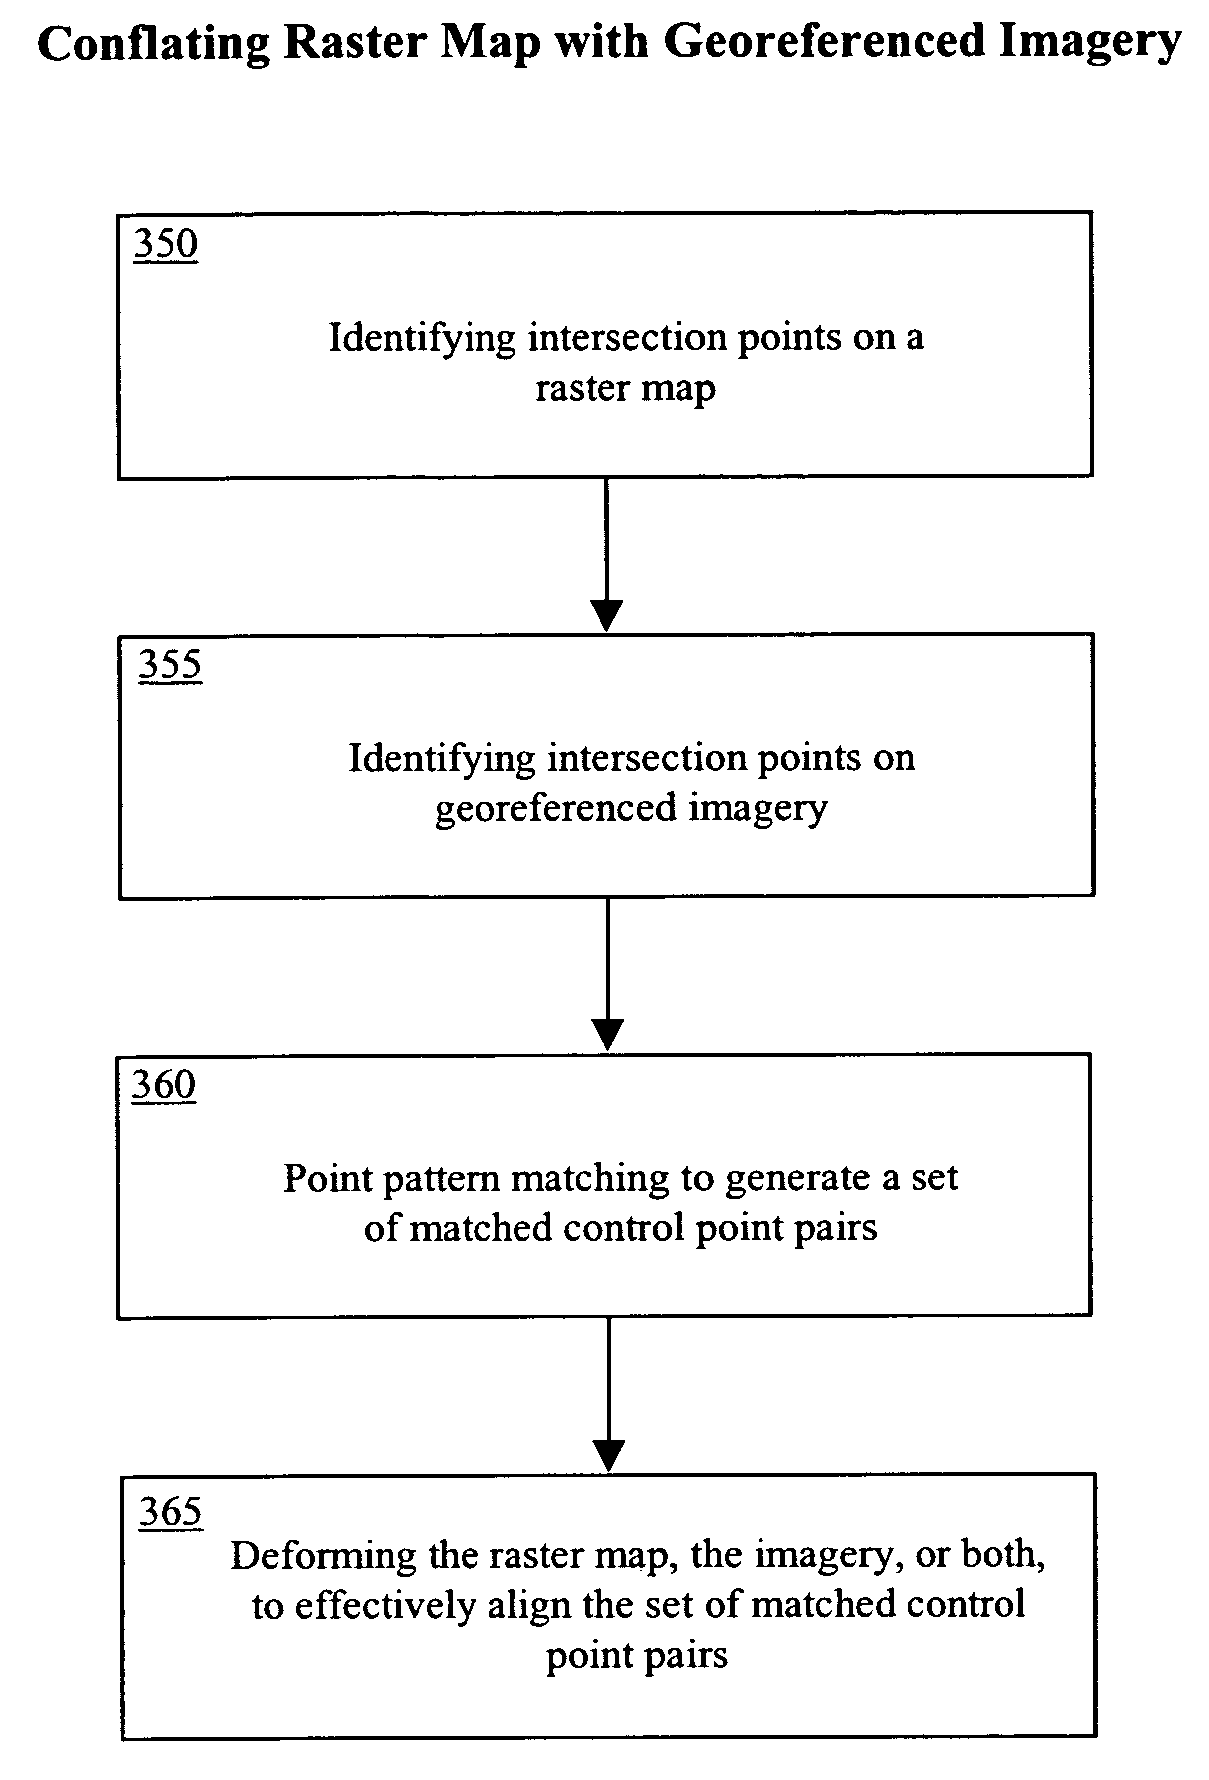 System and method for fusing geospatial data